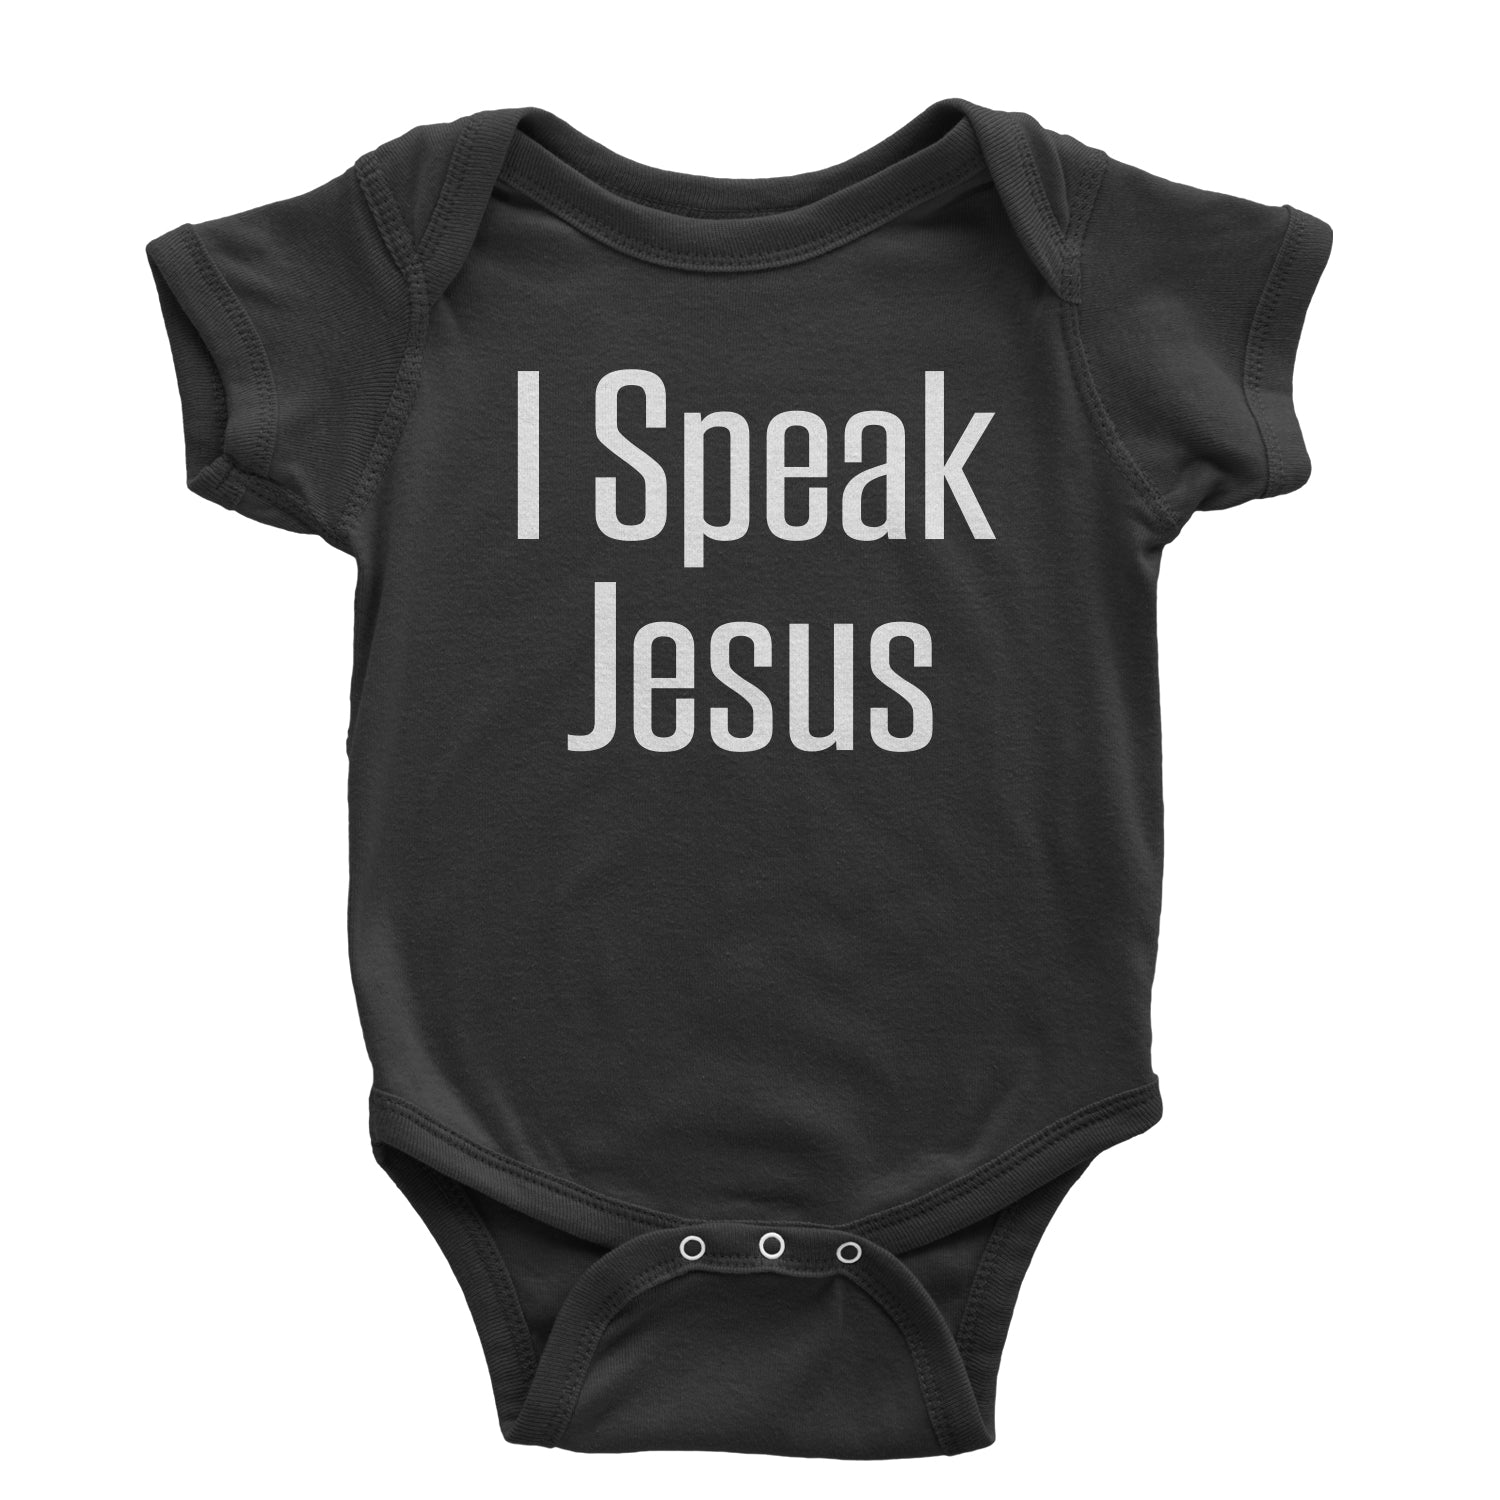 I Speak Jesus Infant One-Piece Romper Bodysuit and Toddler T-shirt catholic, charity, christ, christian, christianity, city, concert, gayle, heaven, in, maverick, only, praise, scars, worship by Expression Tees